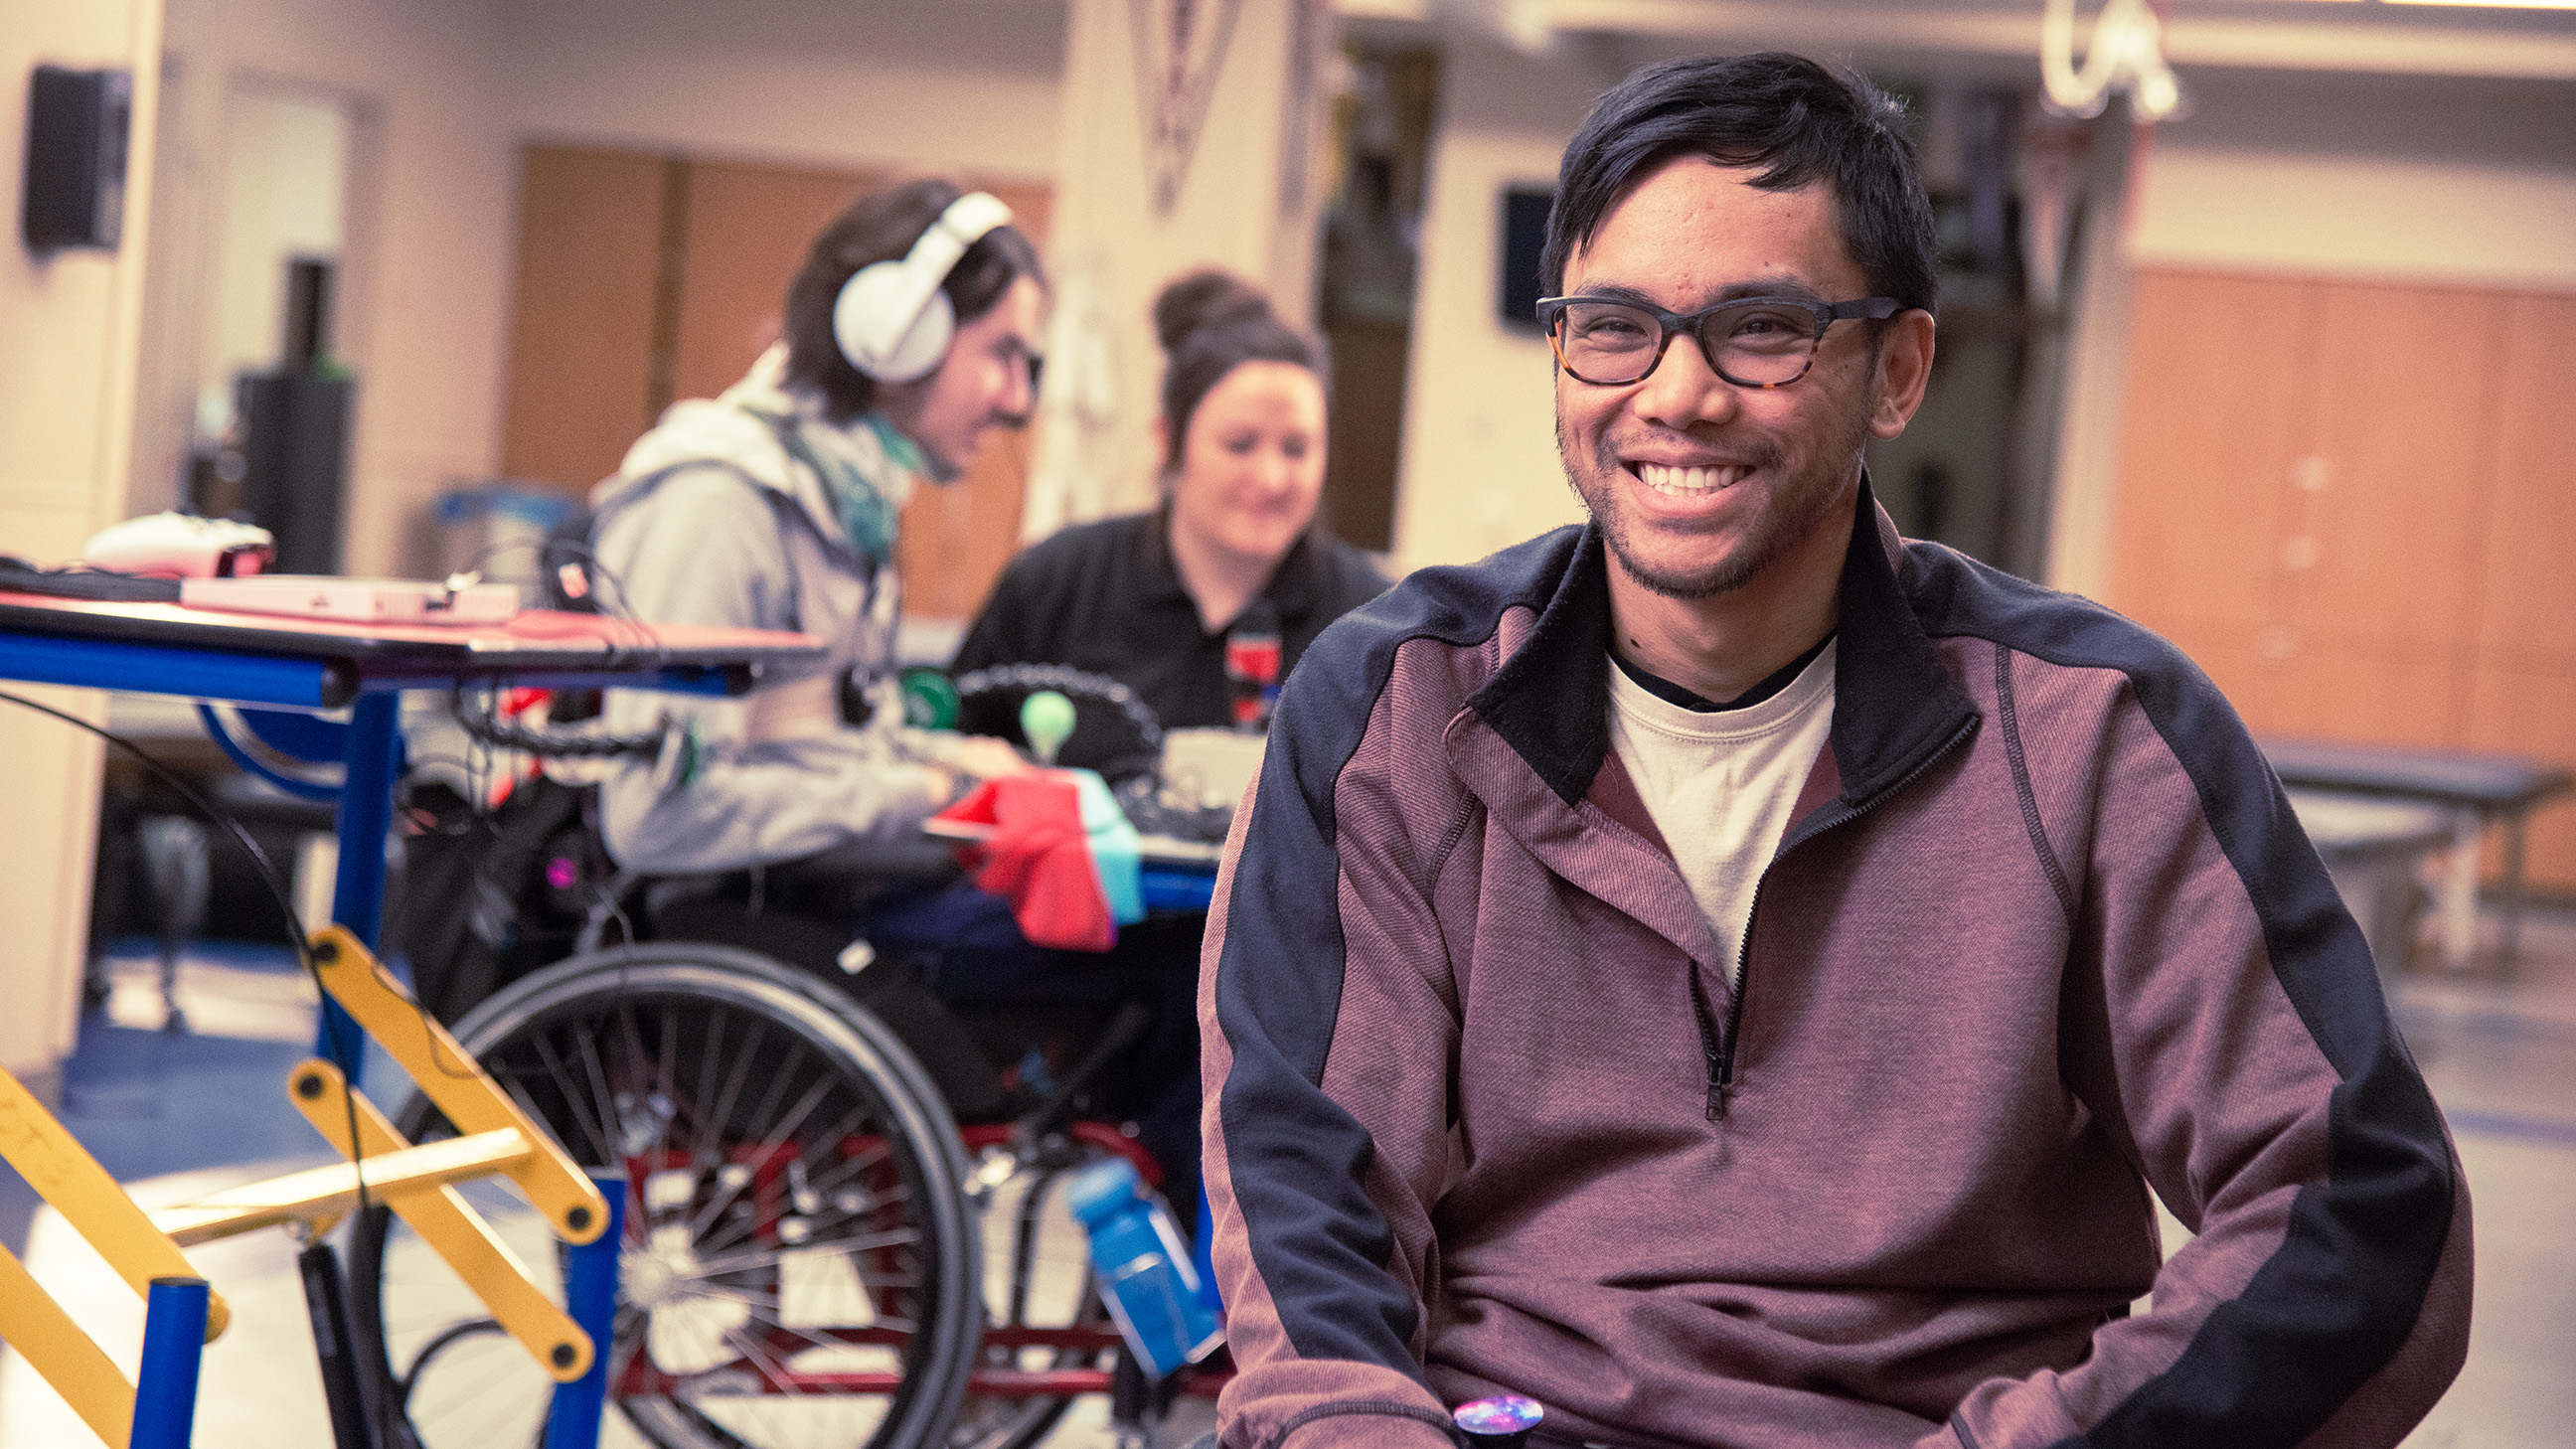 Photo of a man smiling in the foreground and a woman in the background who is working with a man in a wheelchair and using headphones